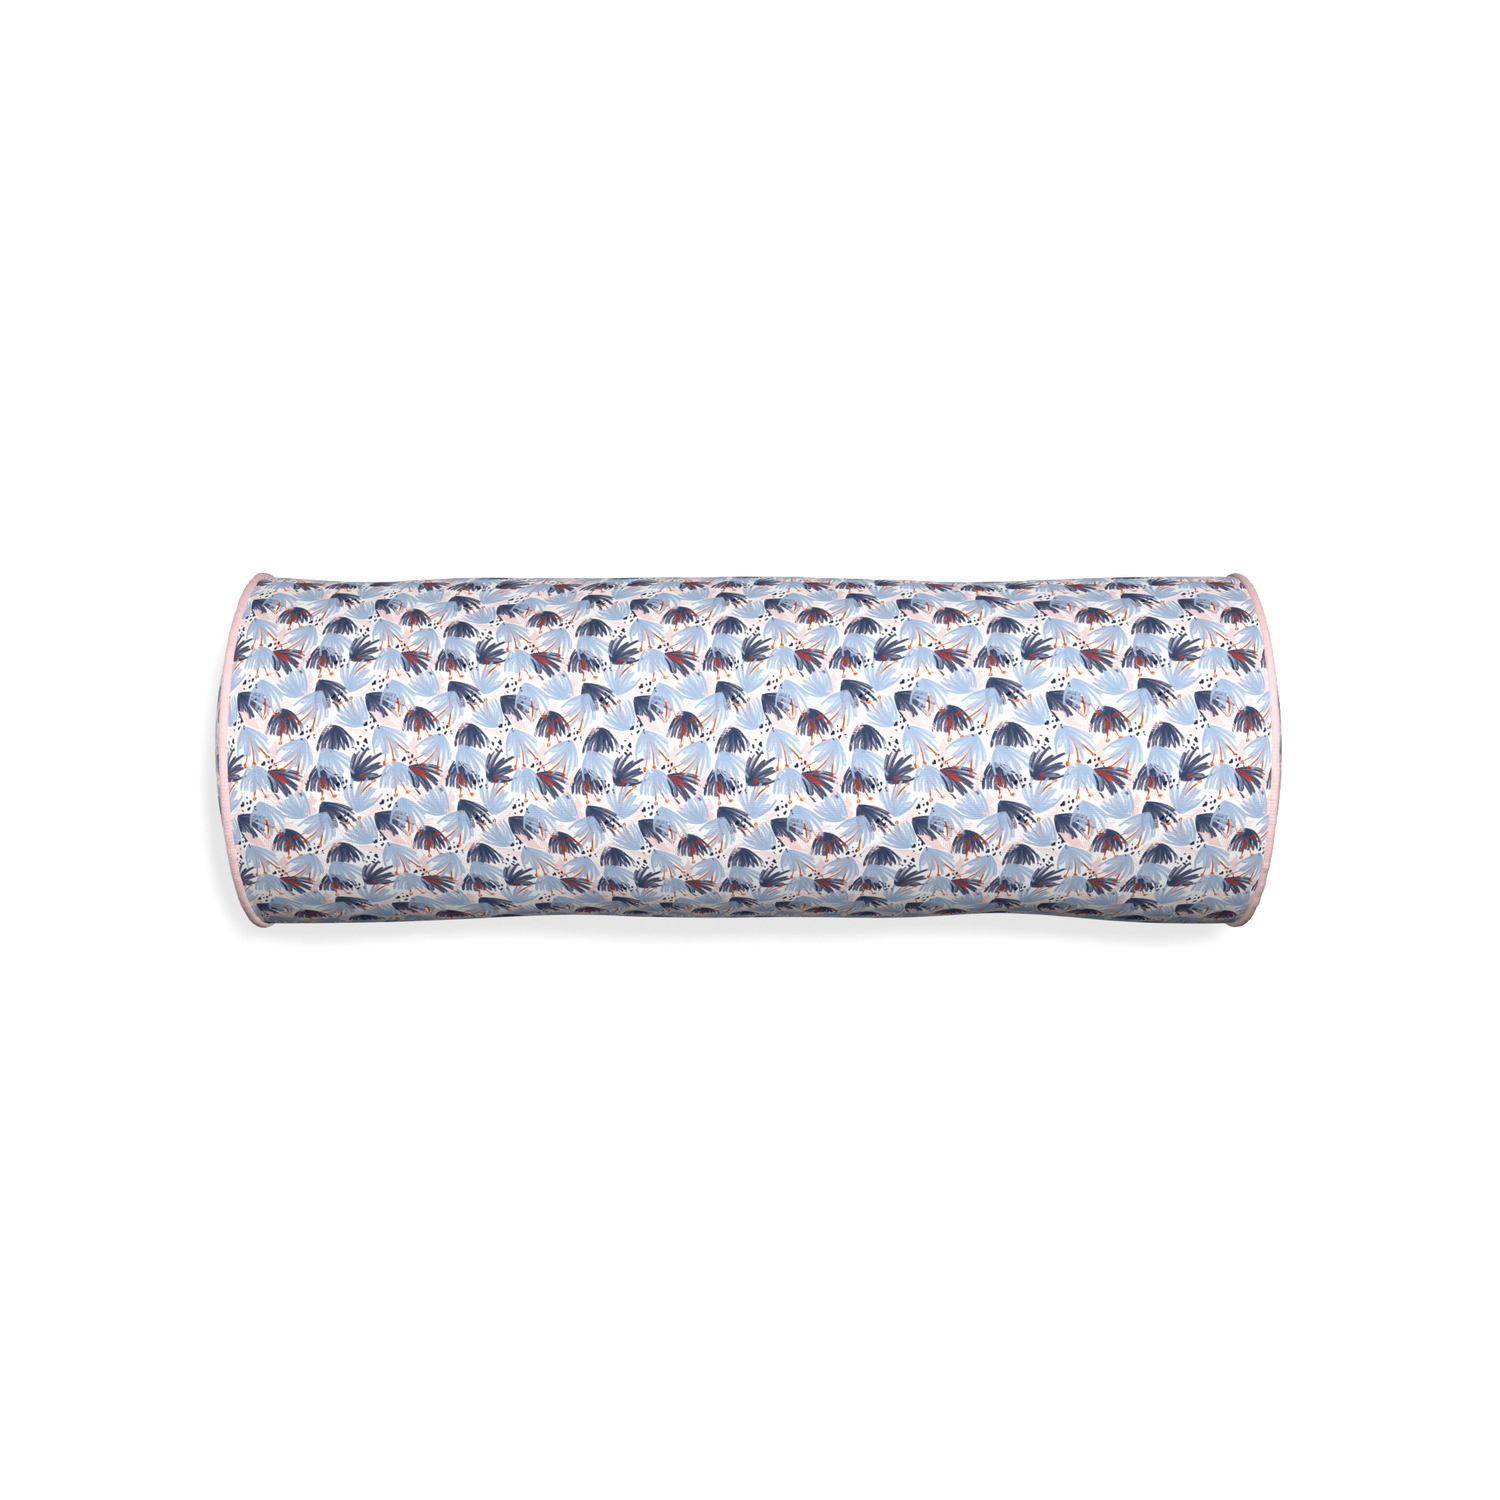 Bolster eden blue custom pillow with petal piping on white background